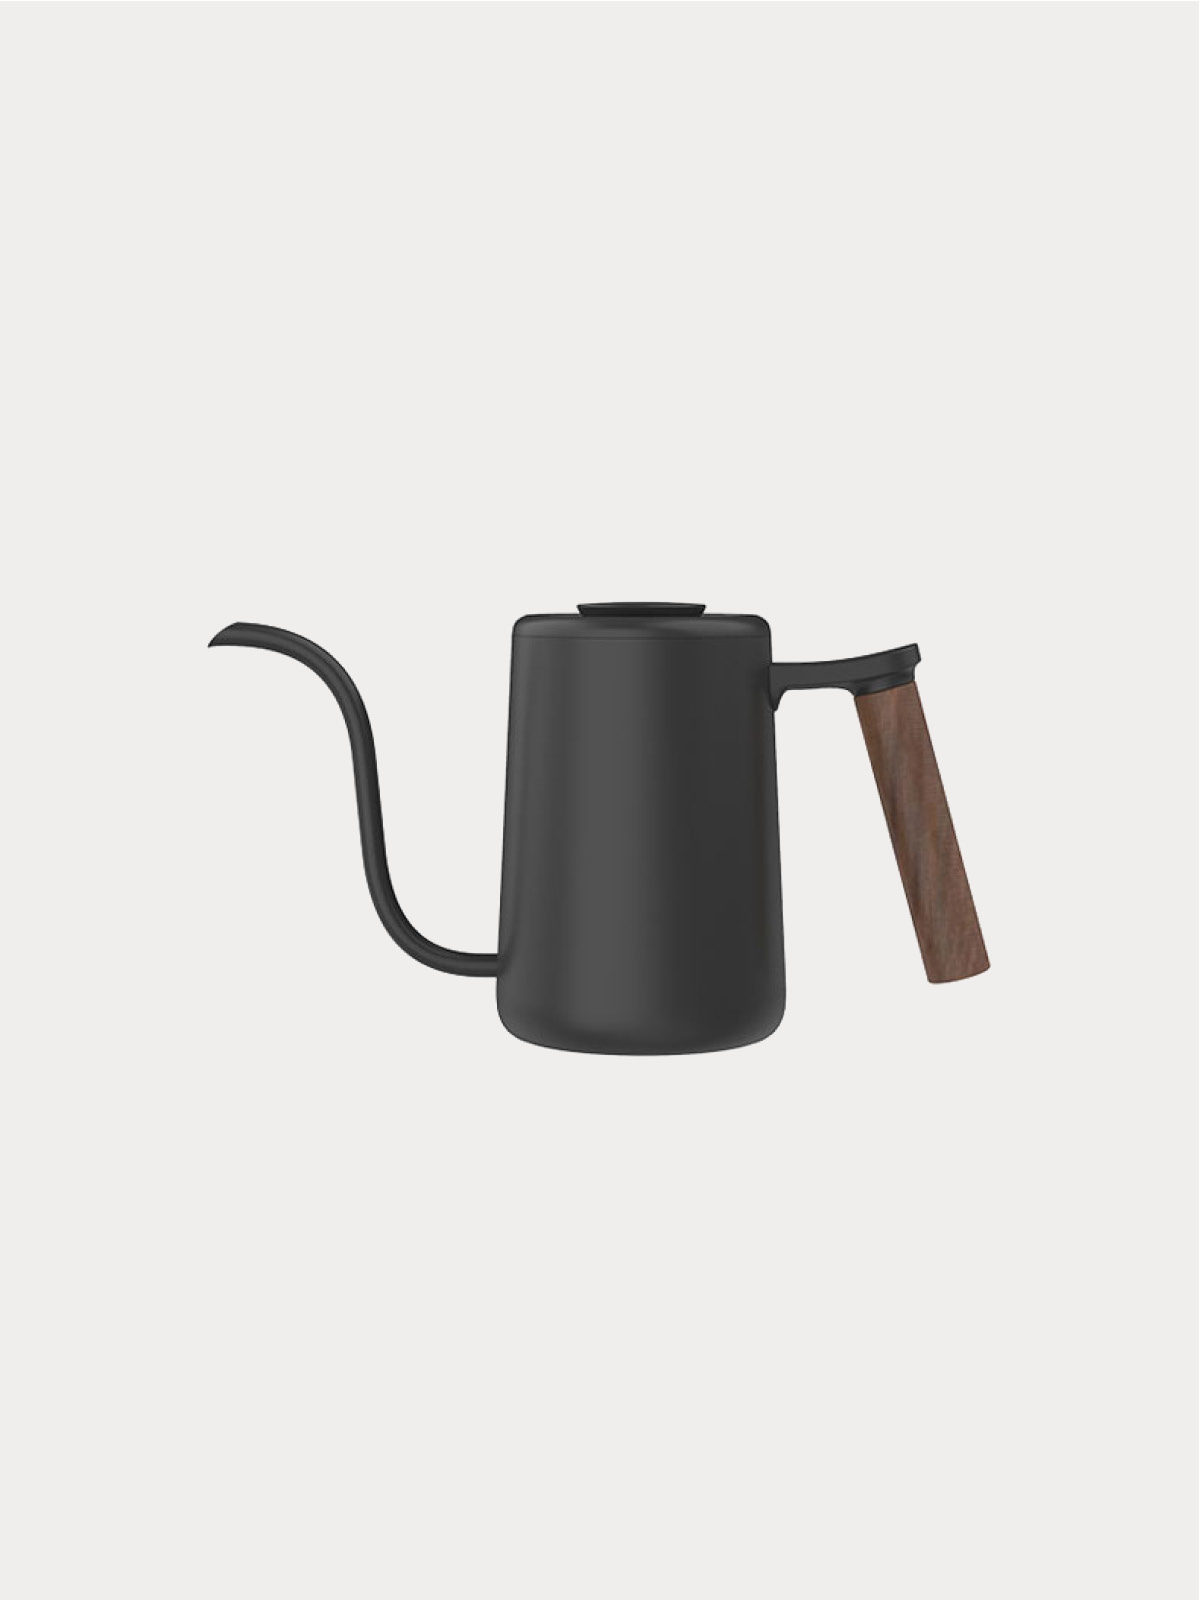 Timemore Fish Youth Pourover Kettle